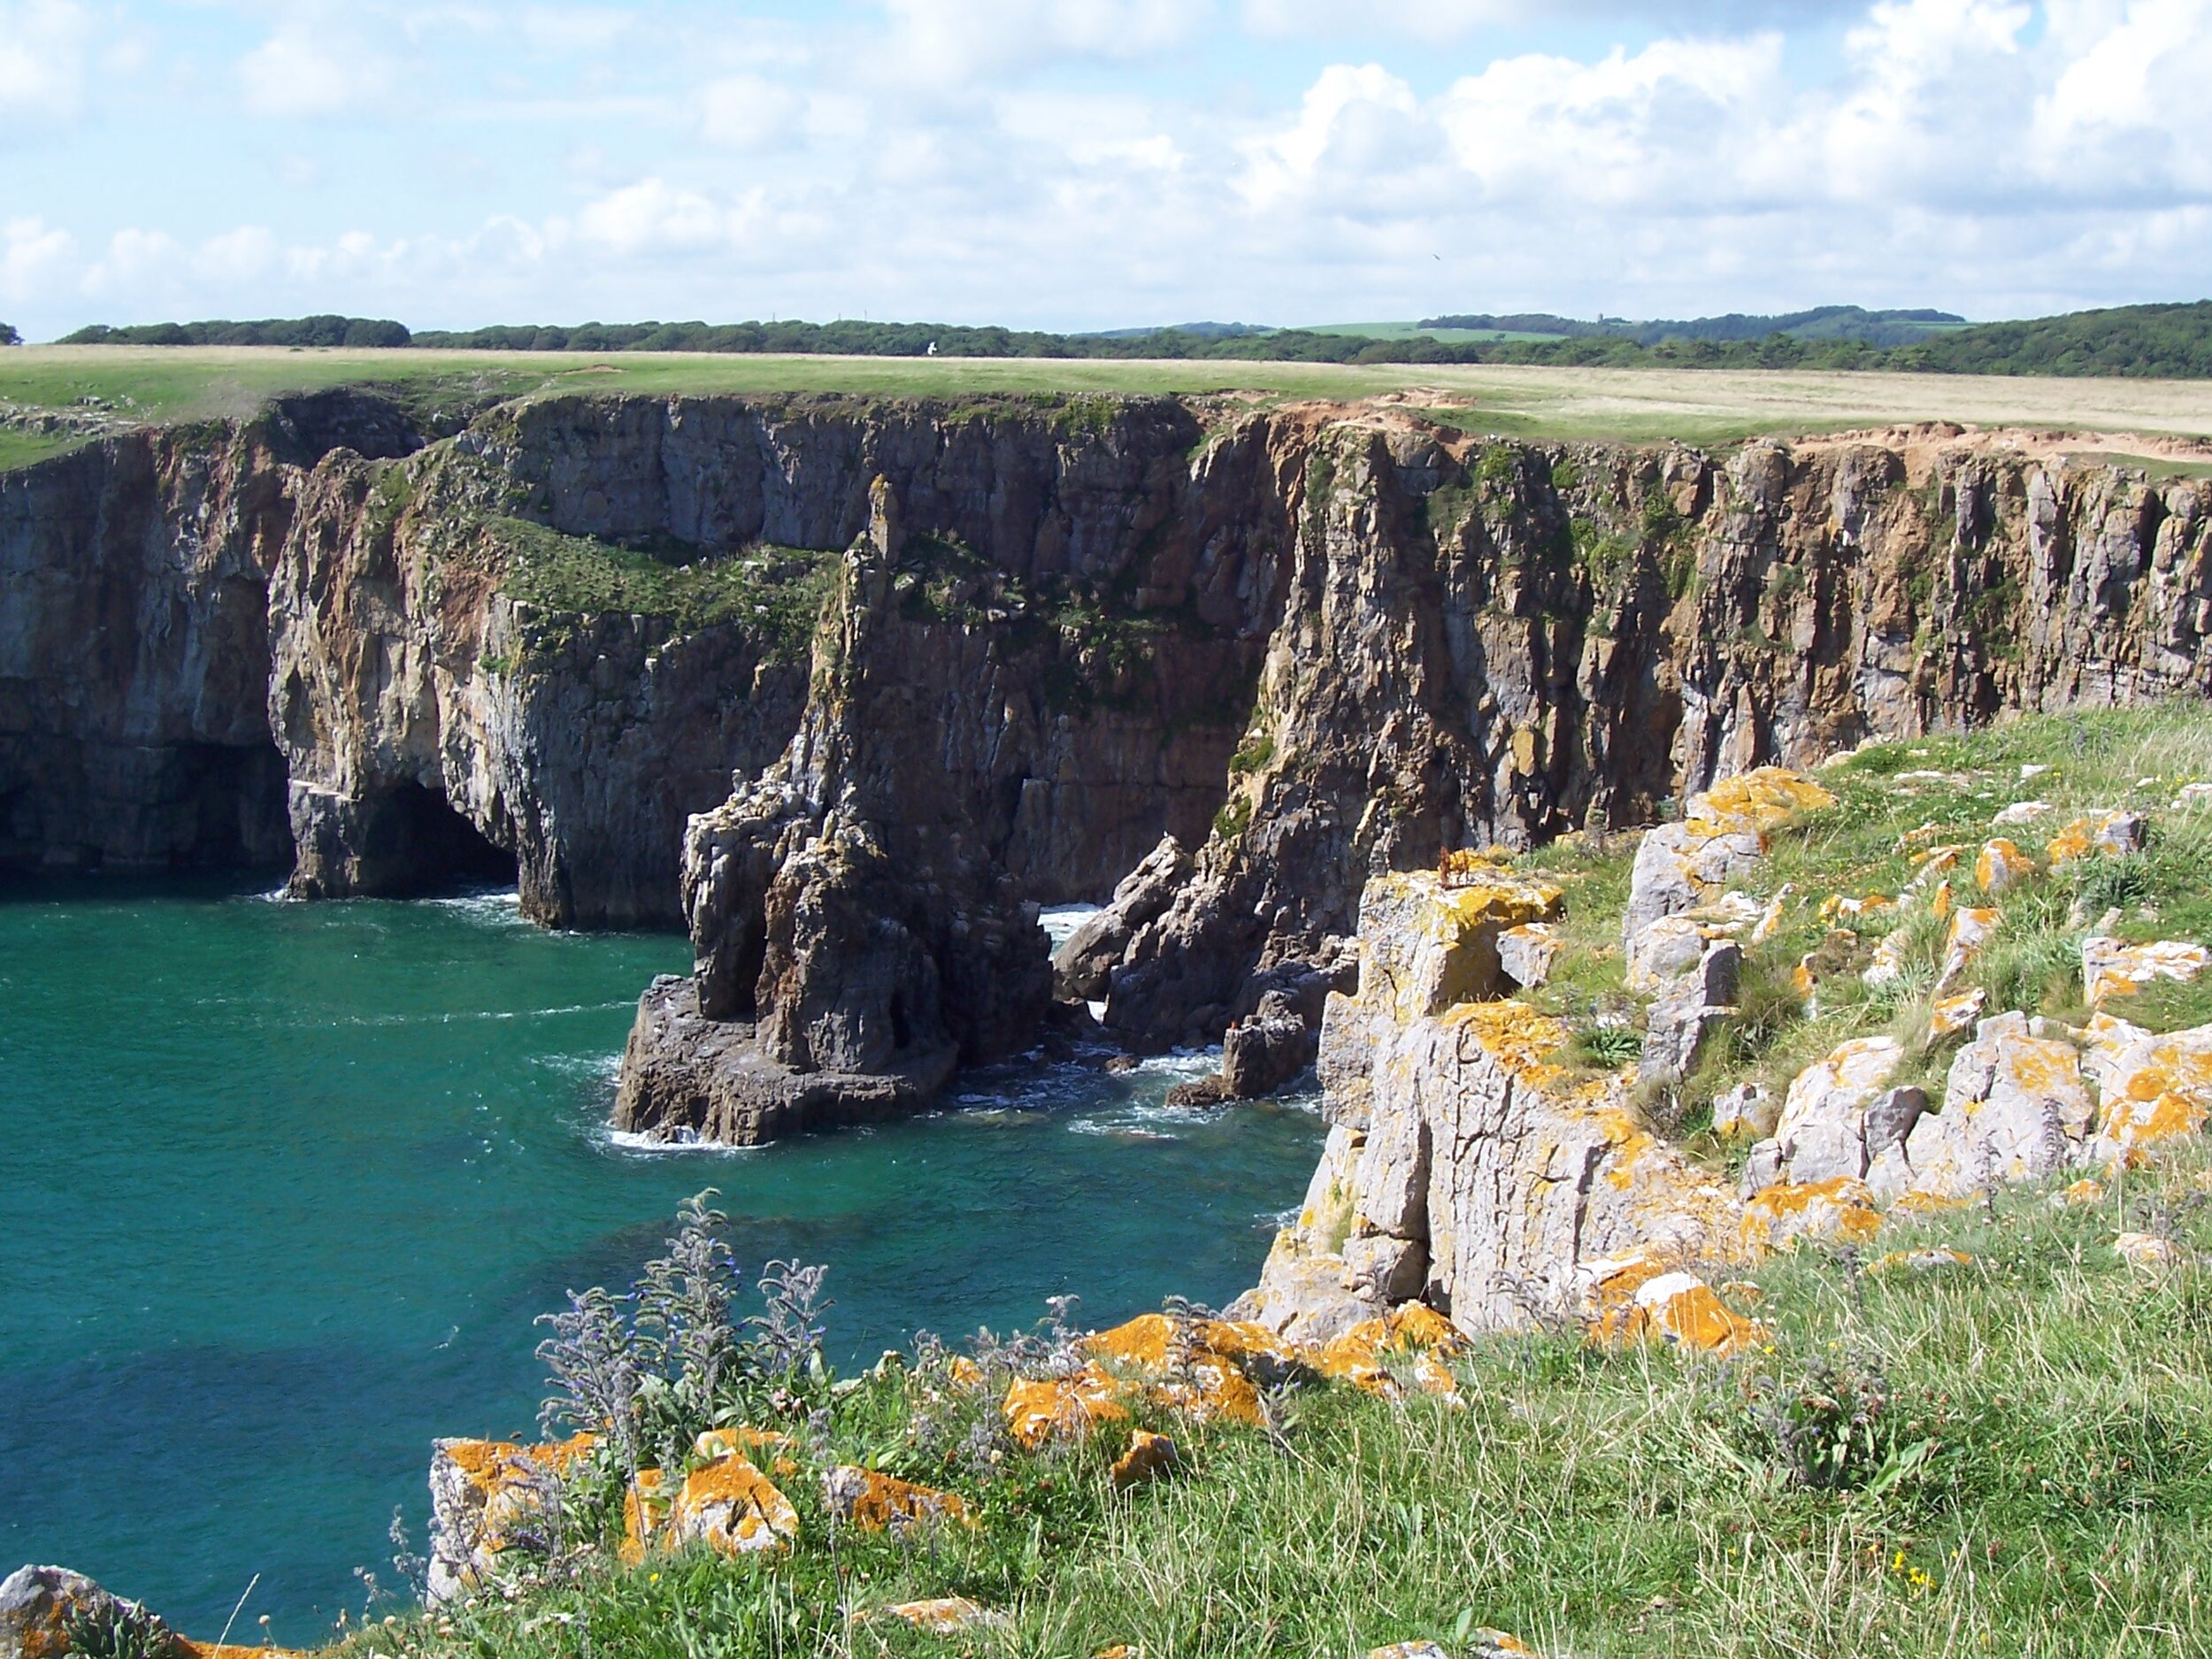 PICTURED: The Pembrokeshire National Park, Wales, one of the sights of the fitness case studies EUROPARC Federation has compiled into their Green Exercise program.